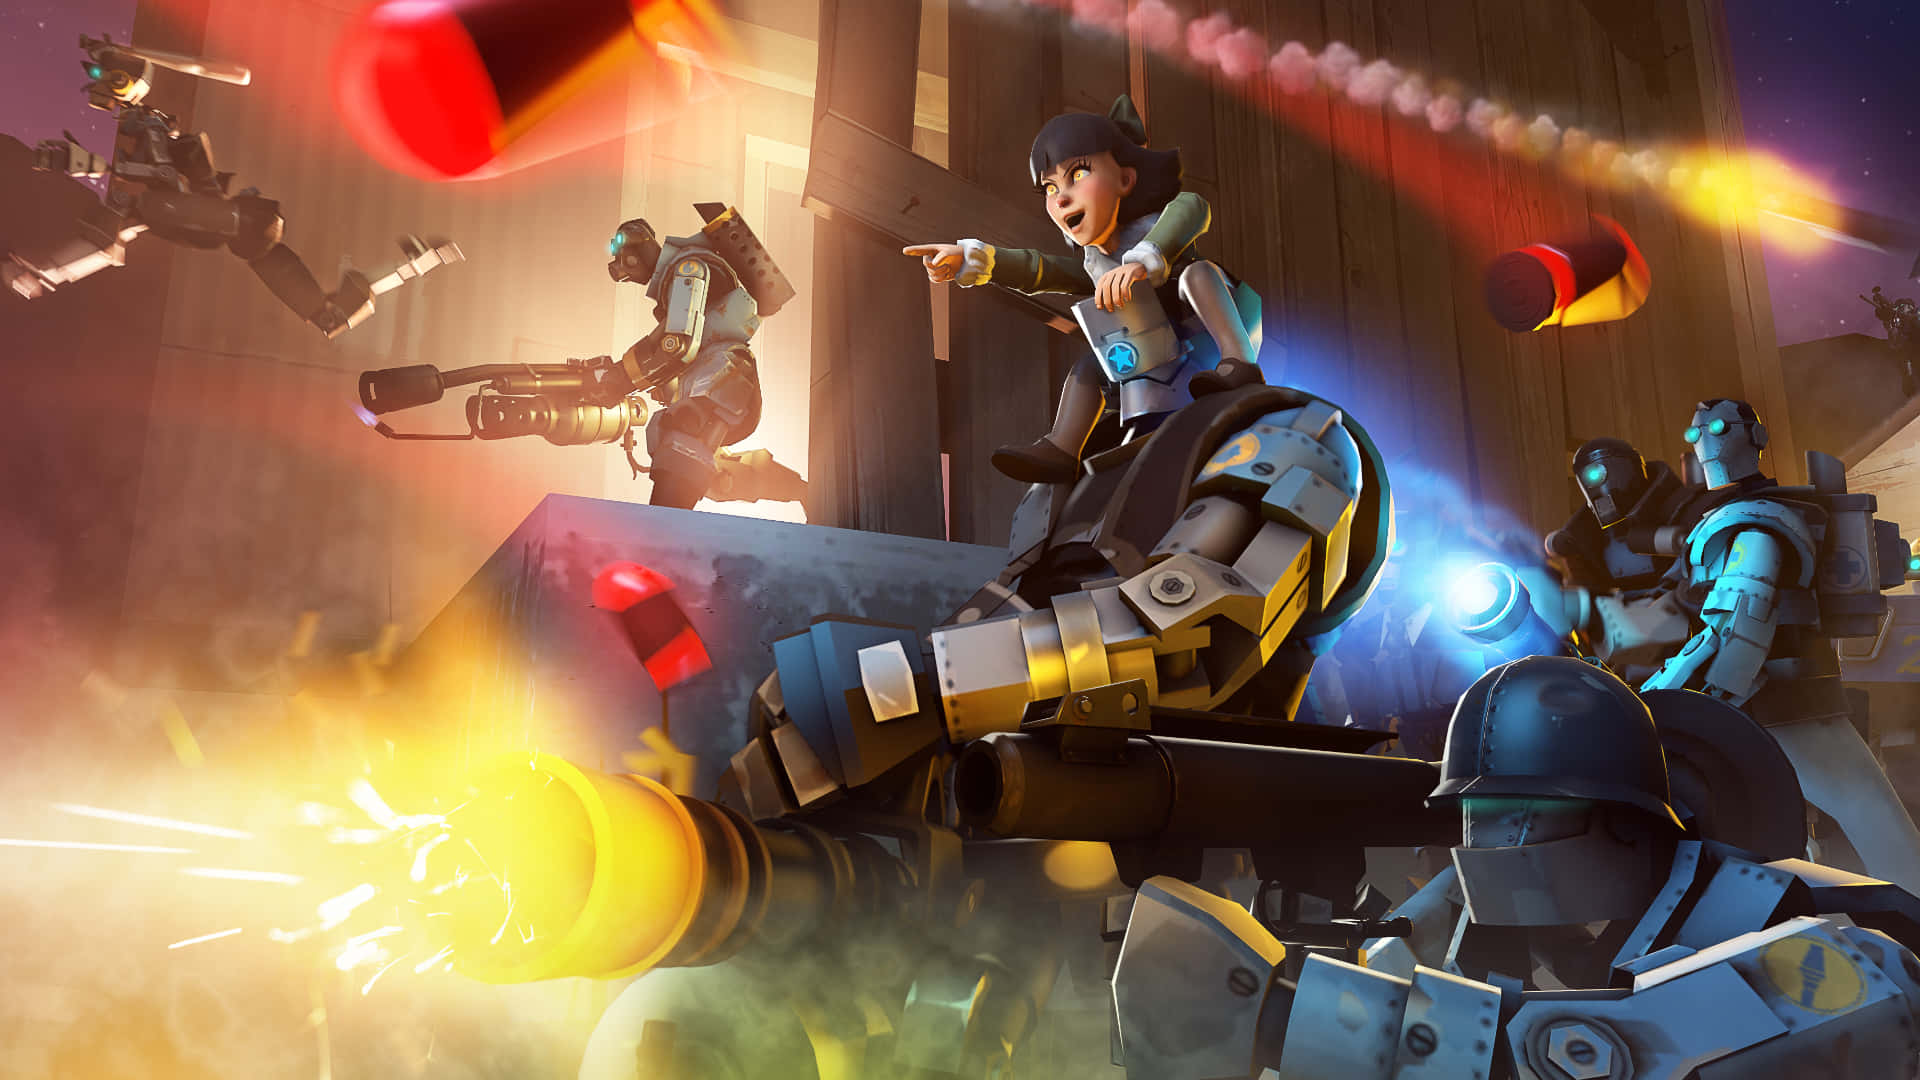 A Group Of People In A Game With Guns And Rockets